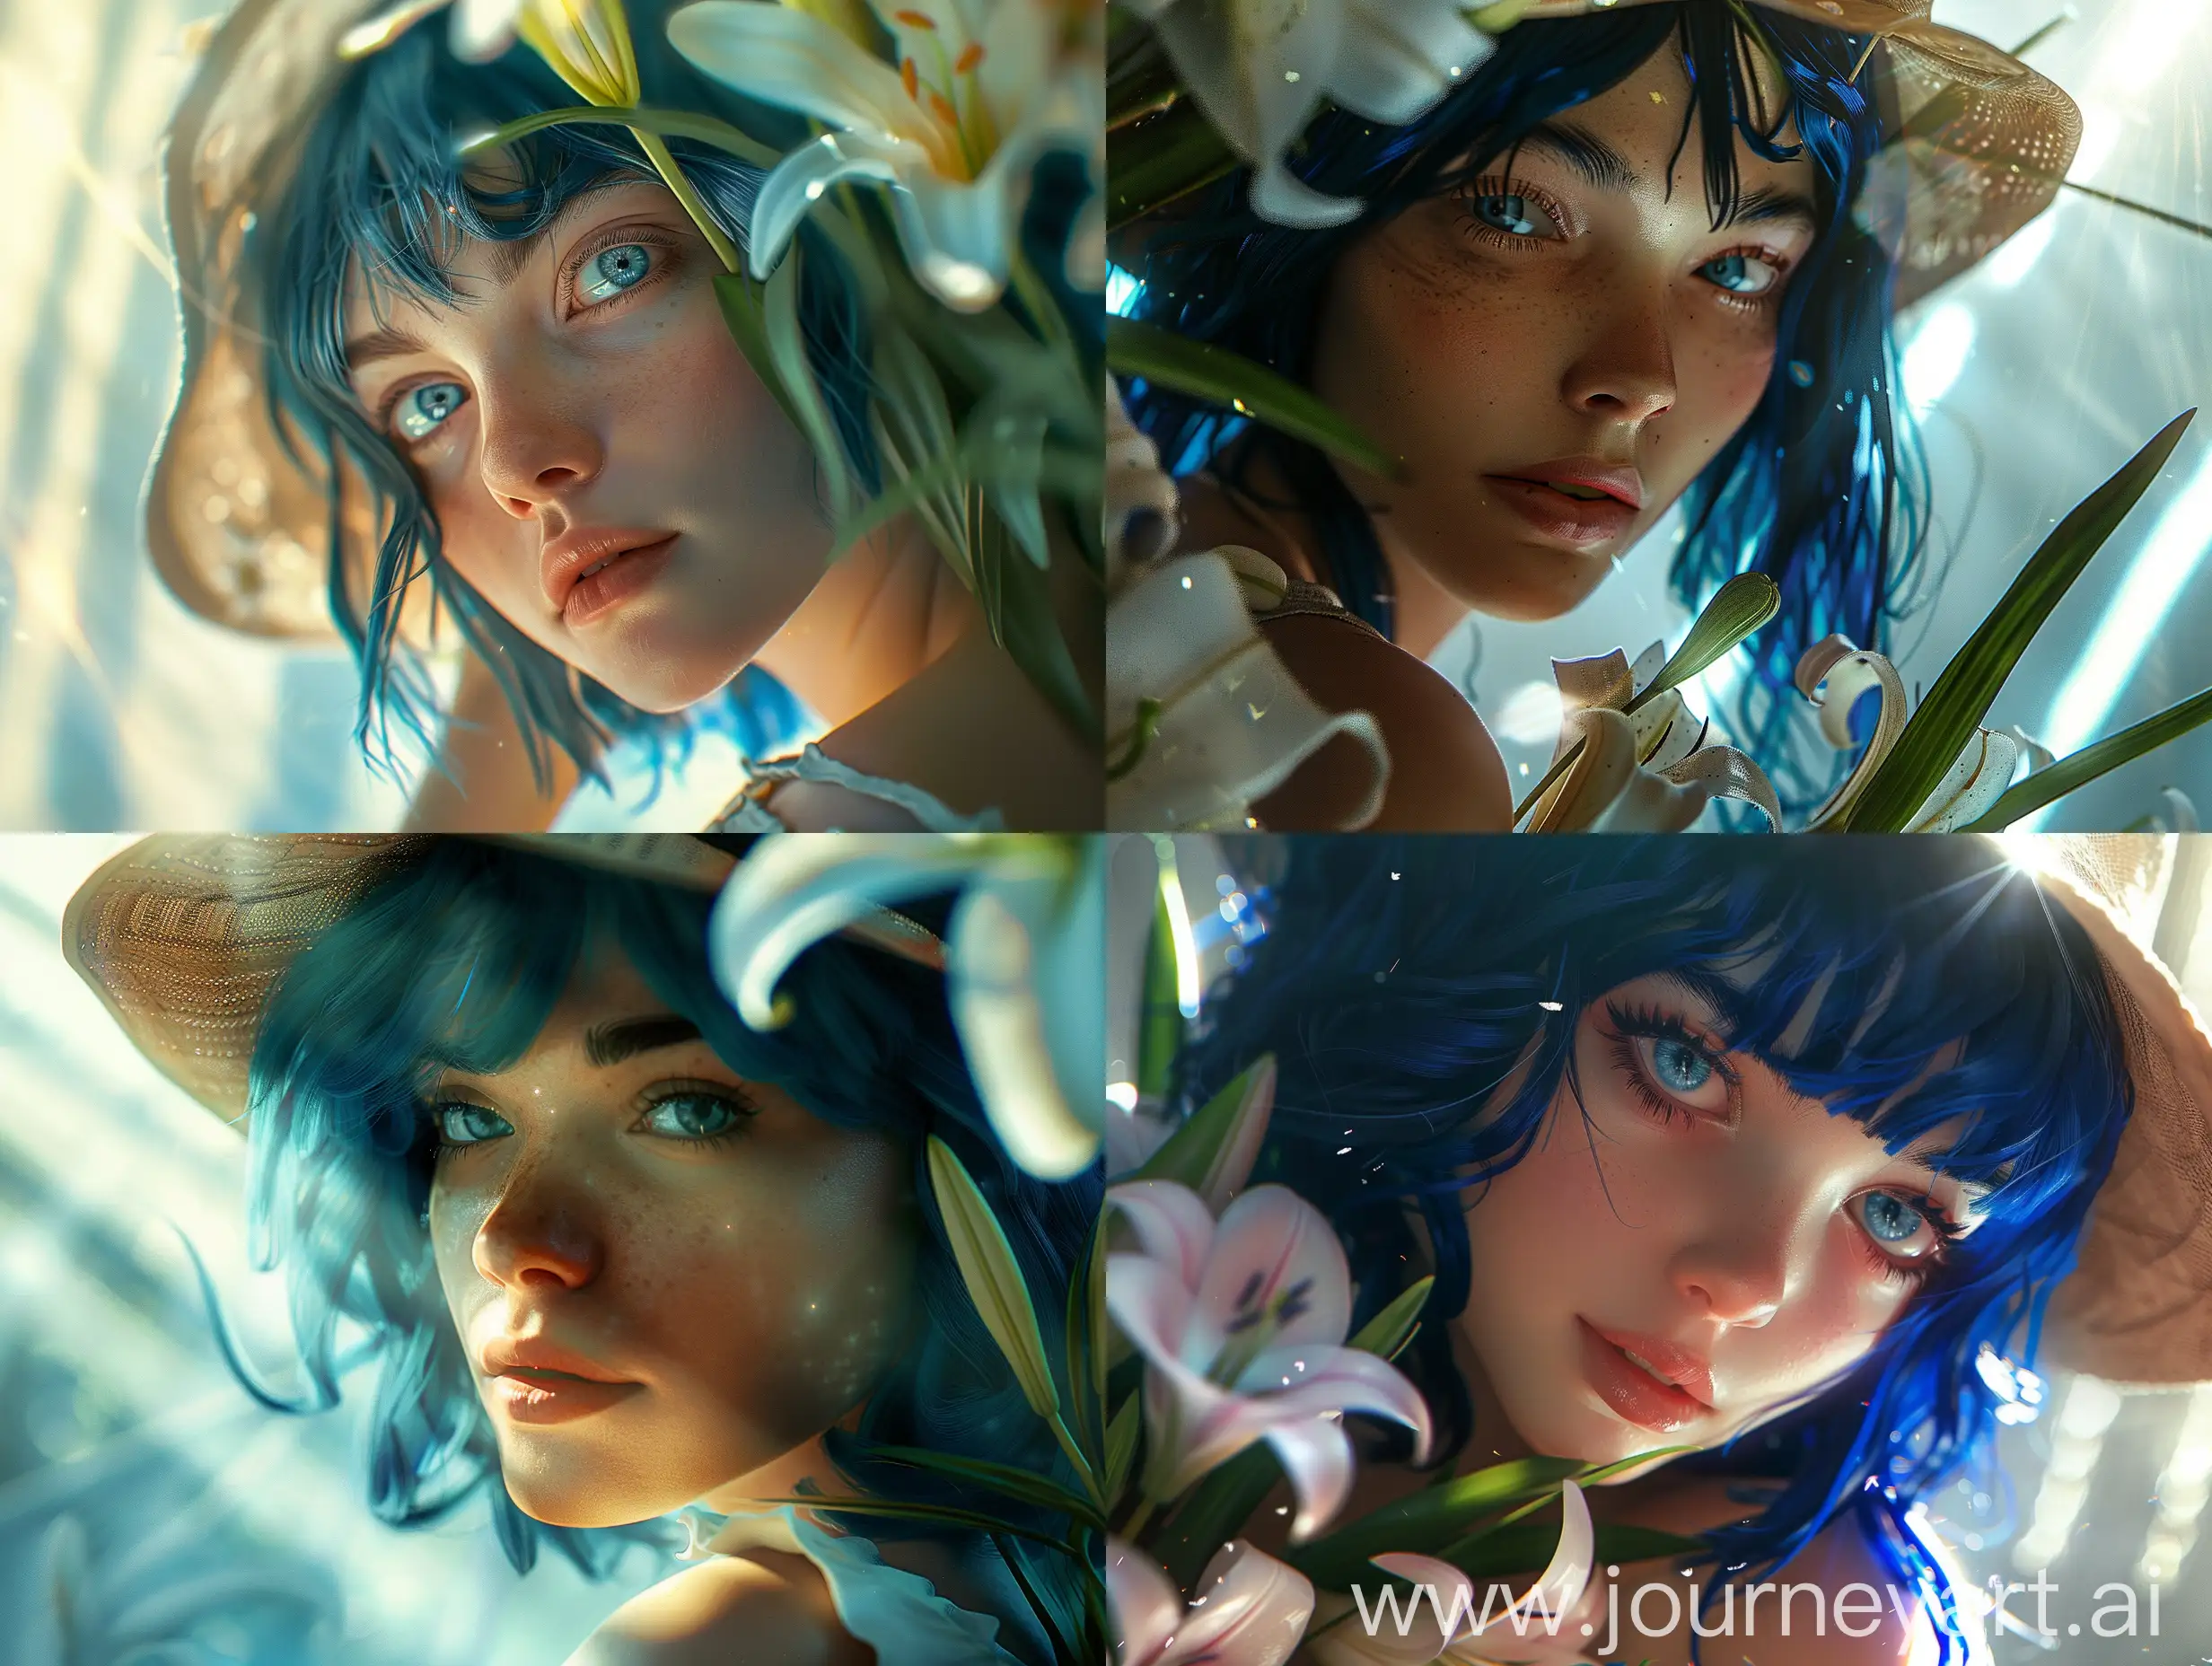 Surreal-Portrait-of-a-Girl-with-Blue-Hair-Holding-a-Bouquet-of-Lilies